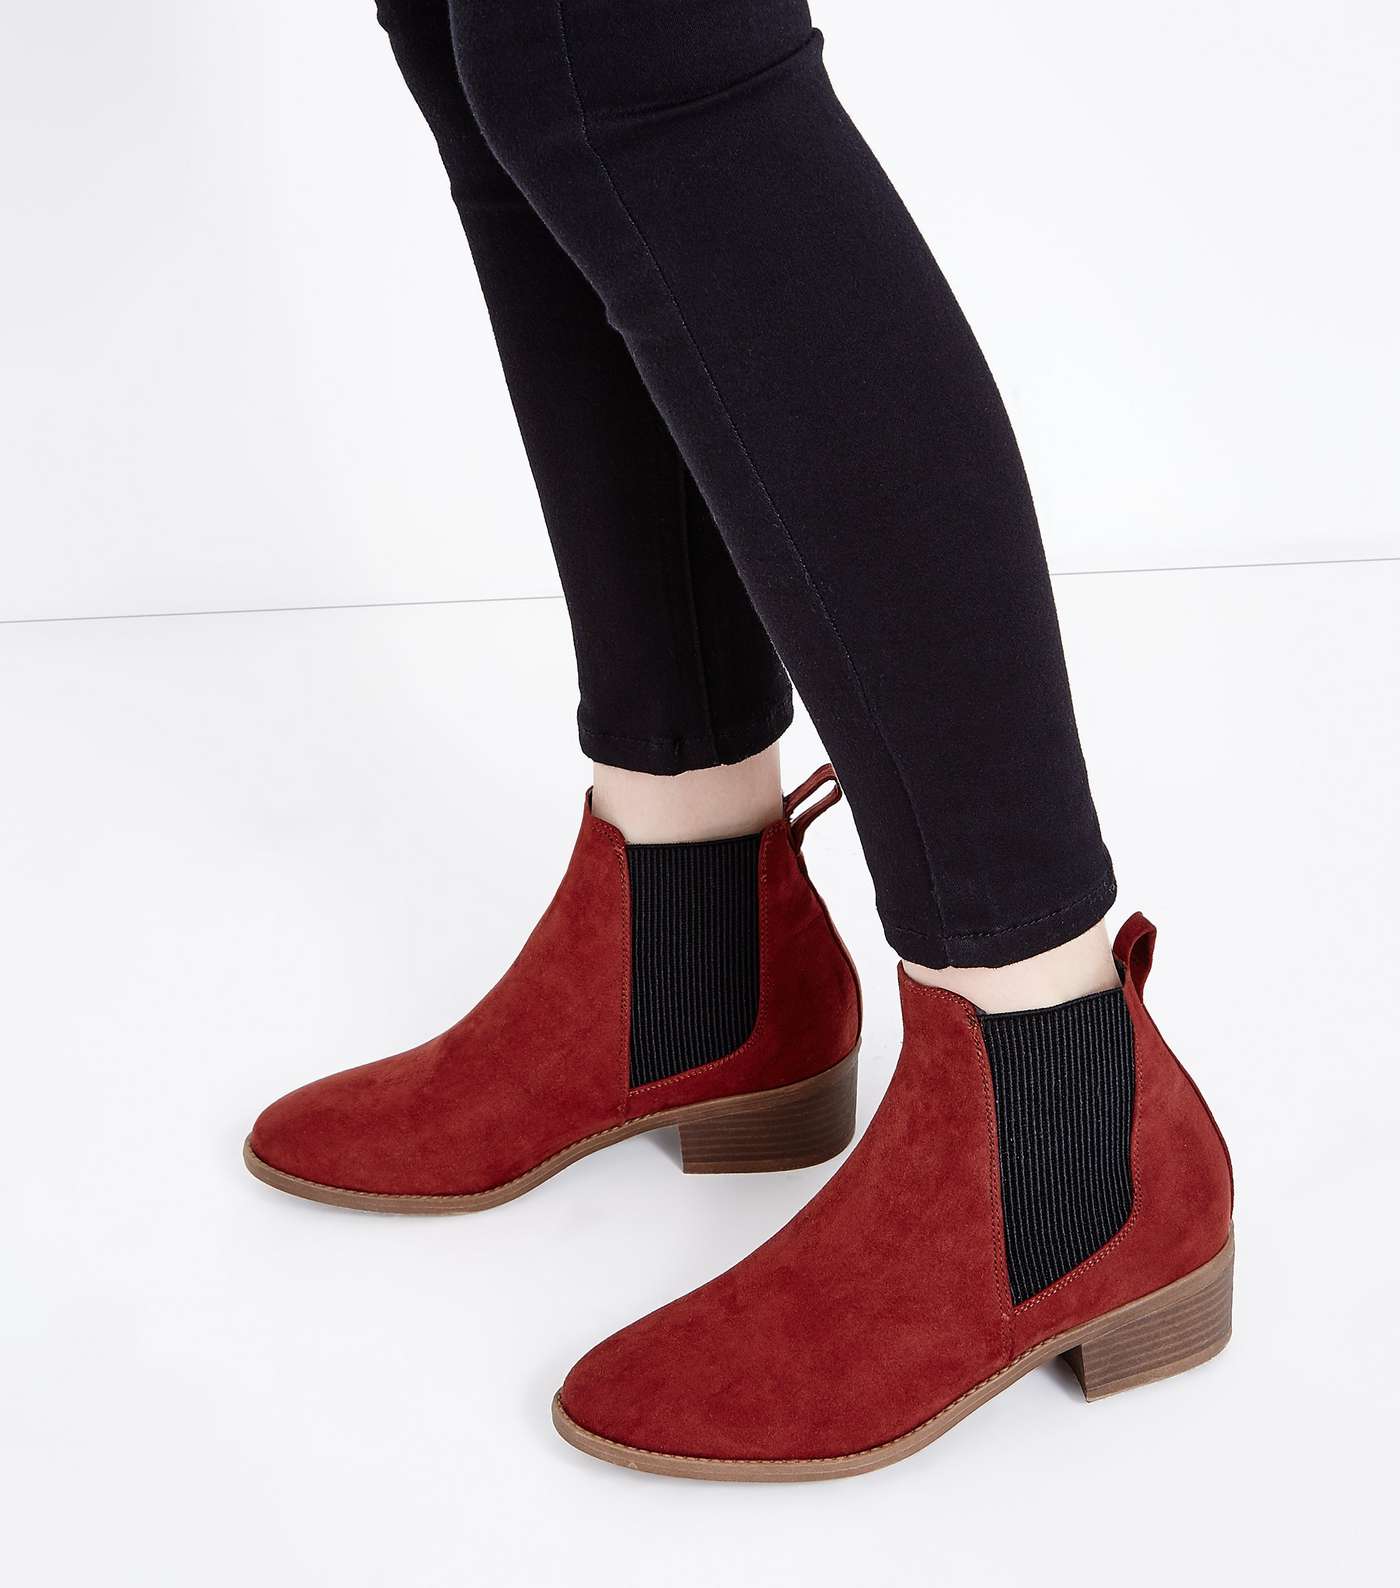 Girls Rust Suedette Chelsea Boots Image 2